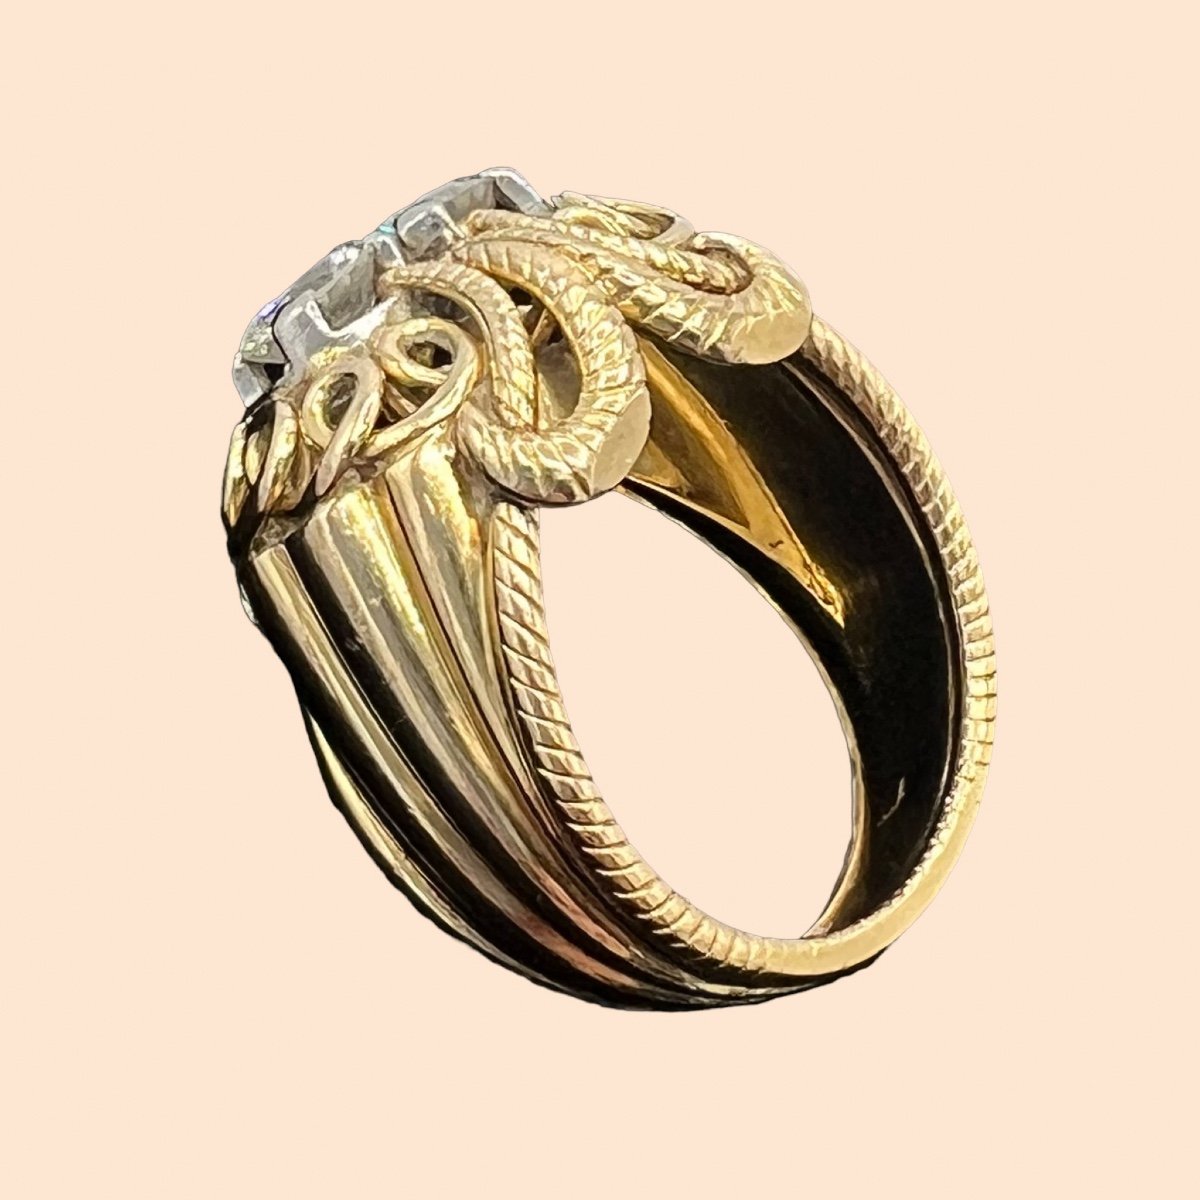 Superb Cocktail Ring From The 1950s In 18 Carat Gold, Set With Two Modern Cut Diamonds,-photo-4